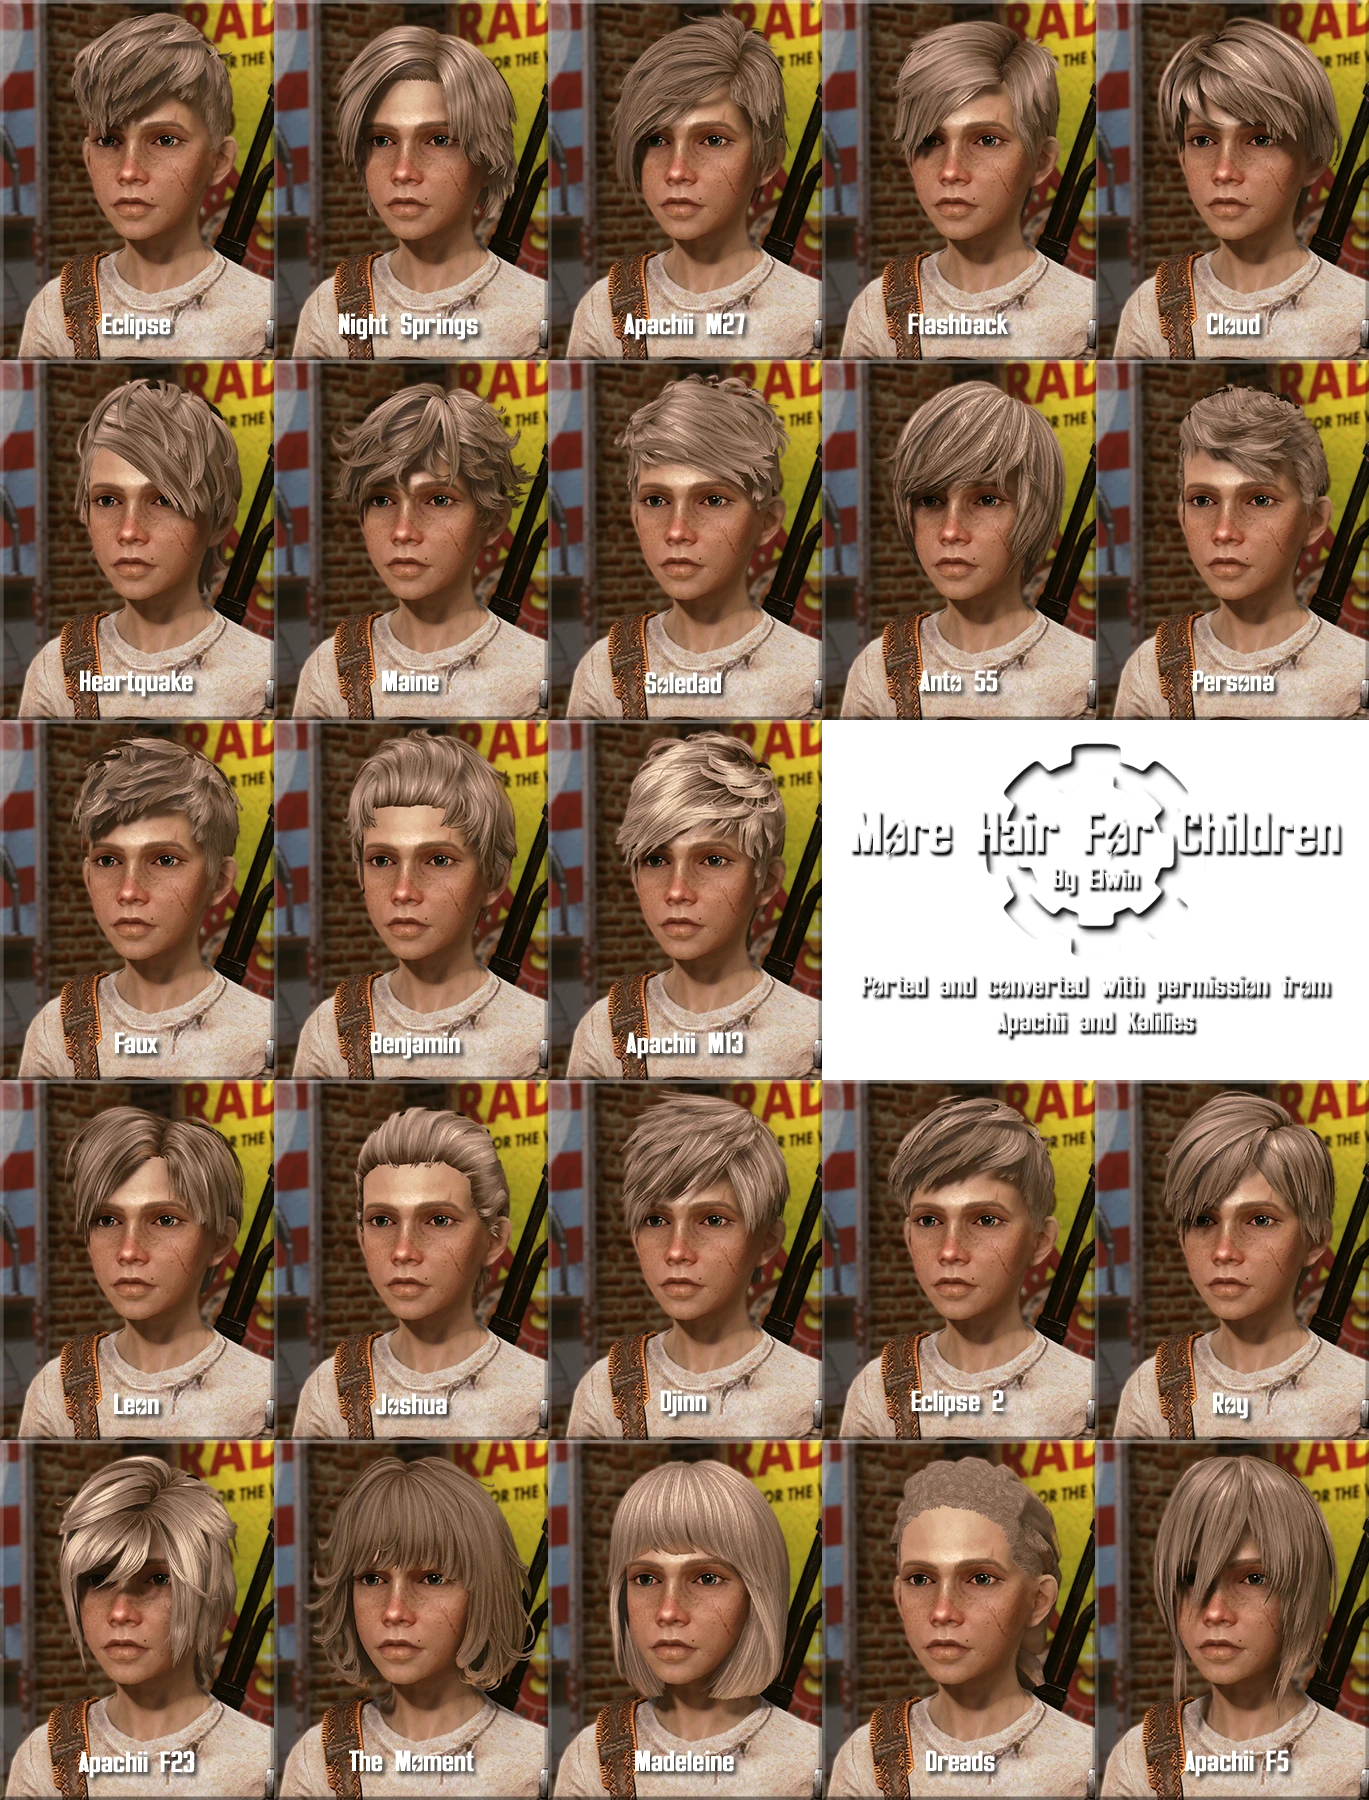 Colors for hair for fallout 4 фото 89